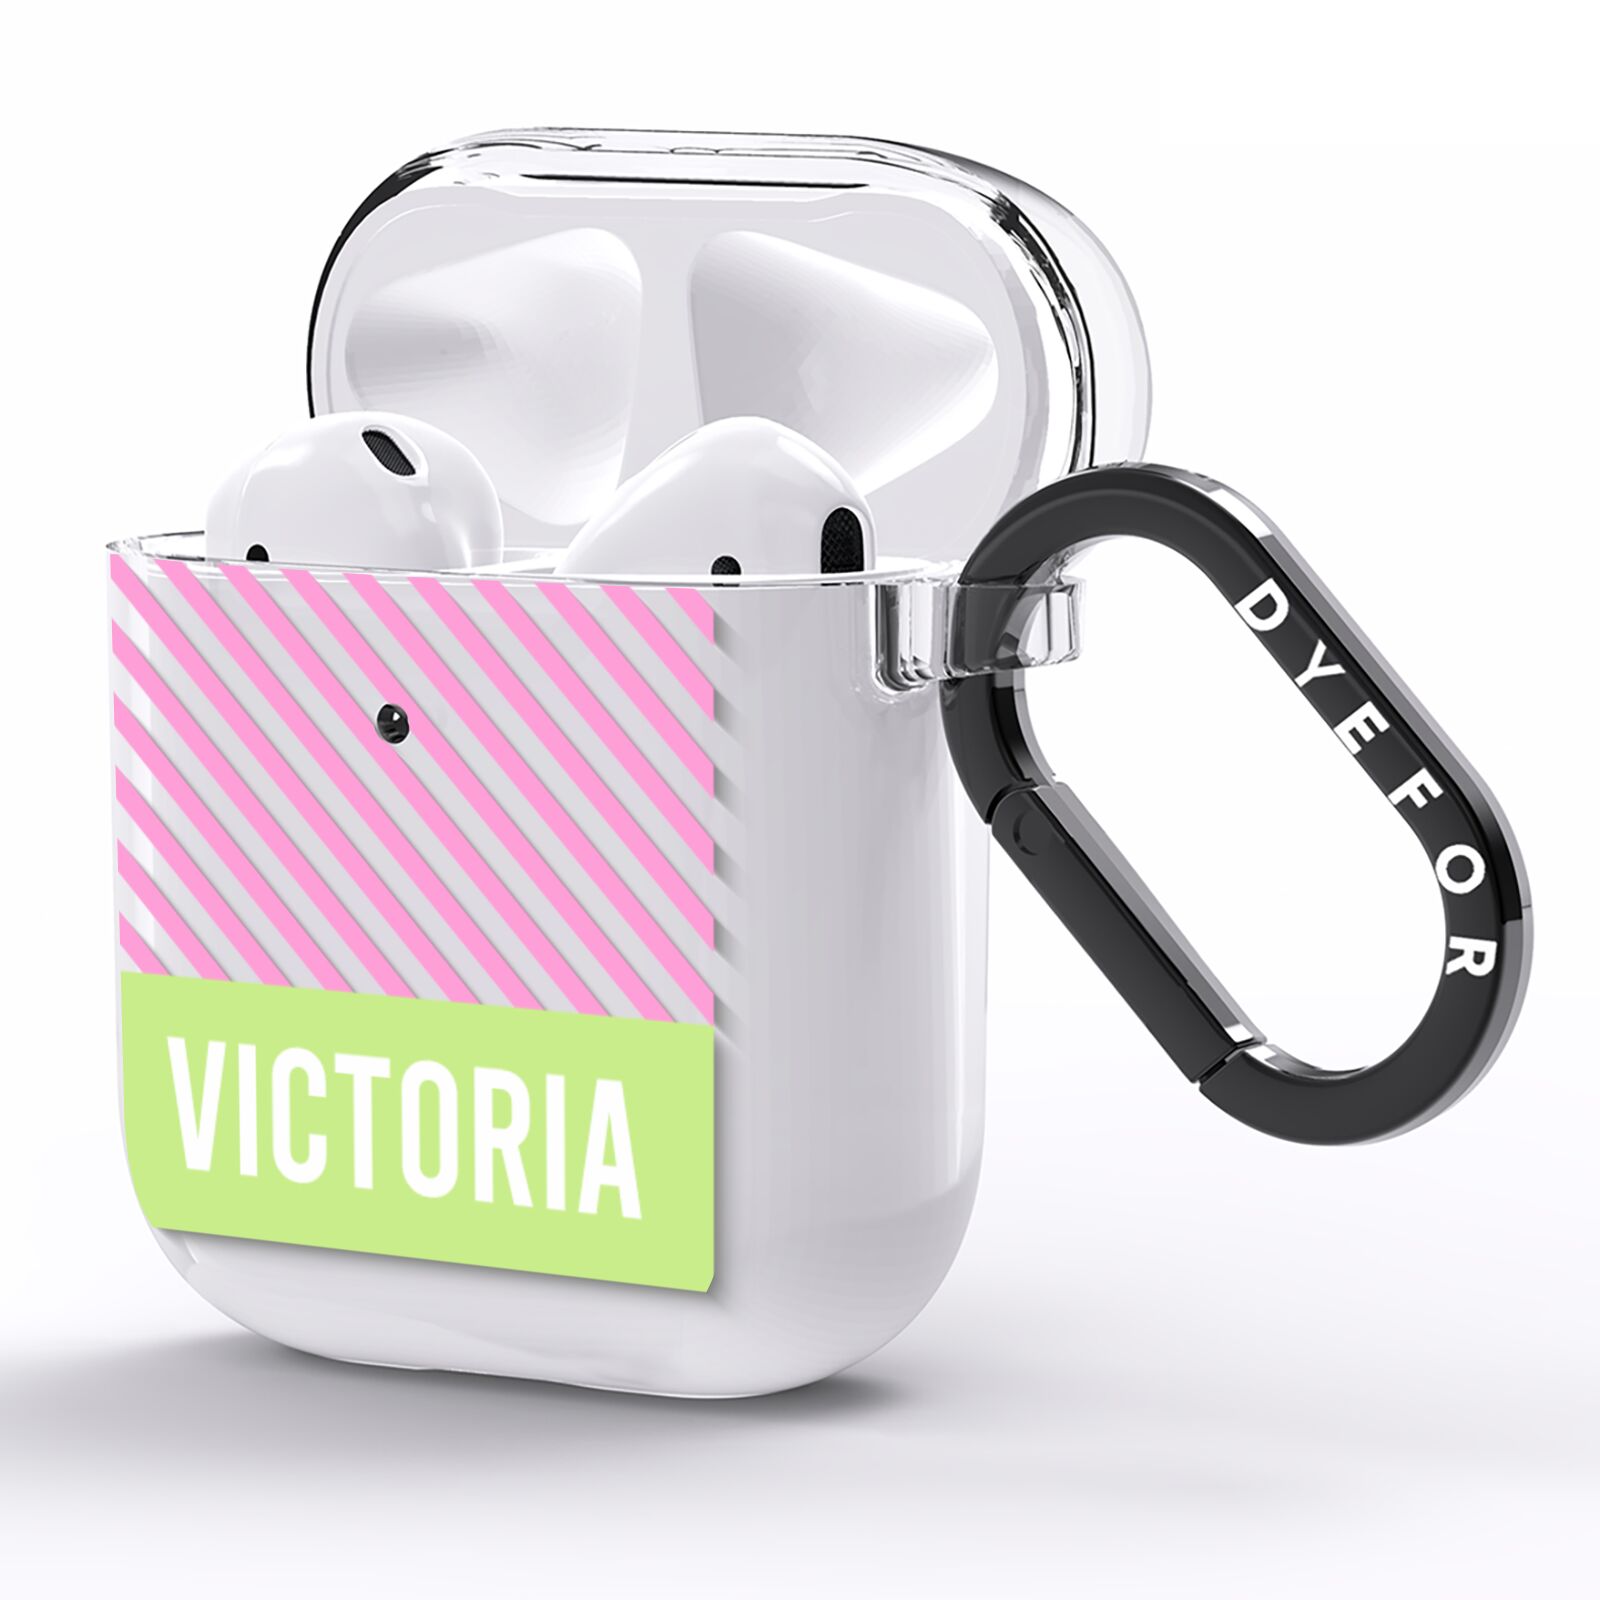 Personalised Pink Green Striped AirPods Clear Case Side Image